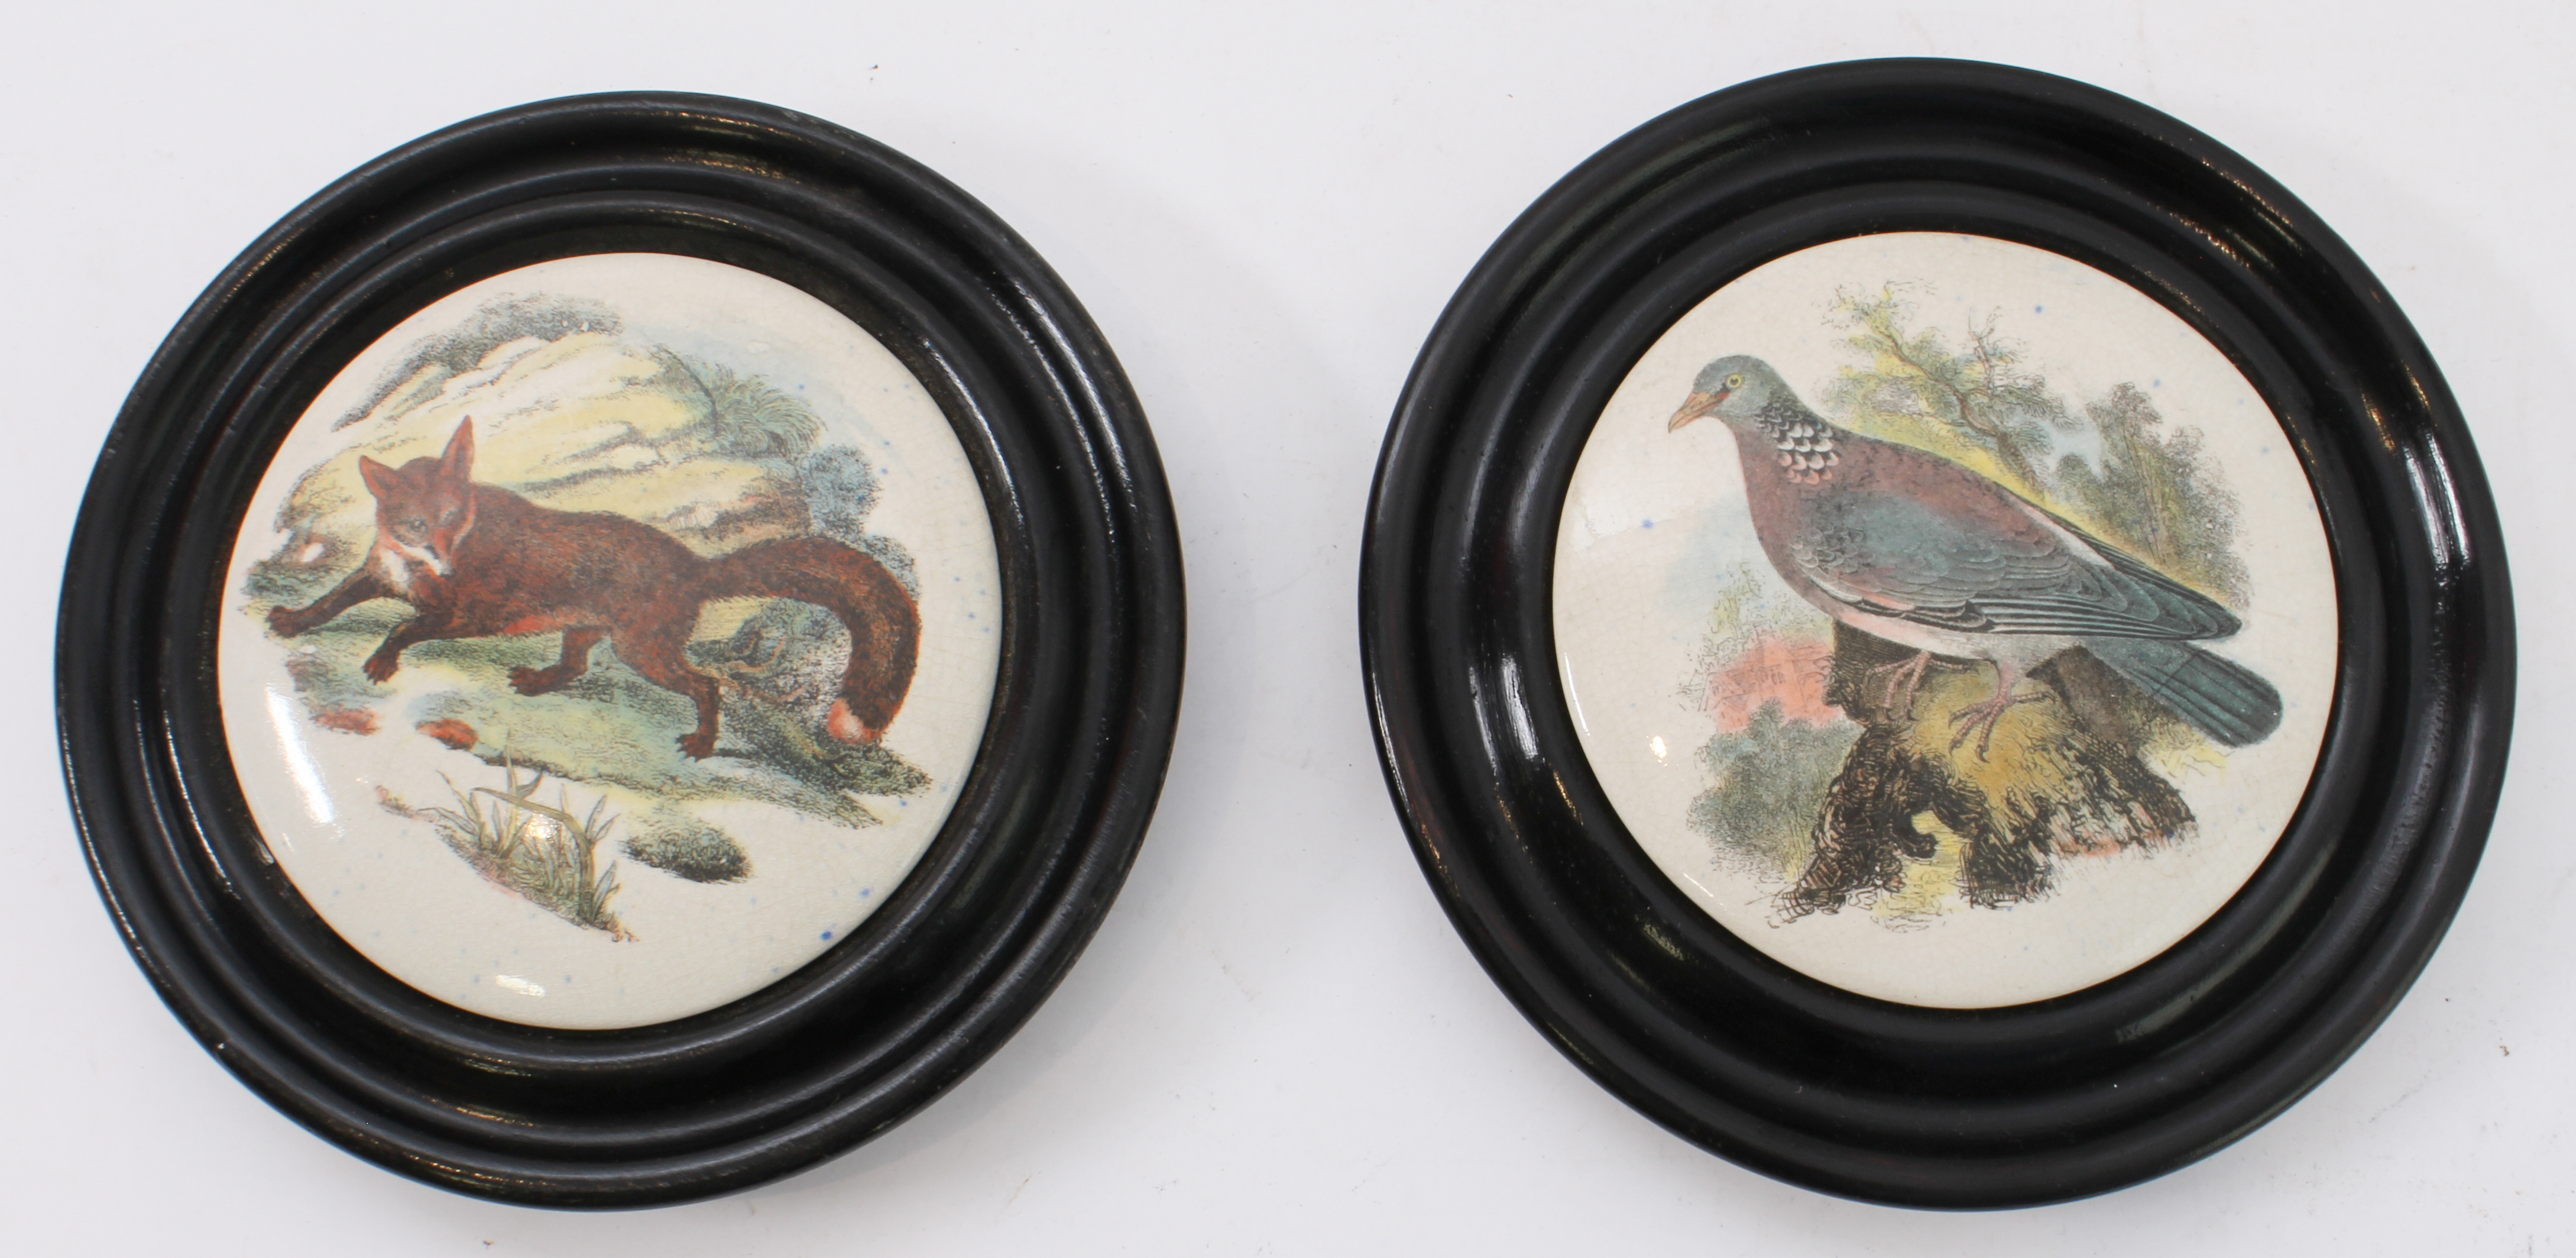 Nine late 19th to early 20th century ceramic pot lids: 1. six depicting various birds and animals, - Image 4 of 9